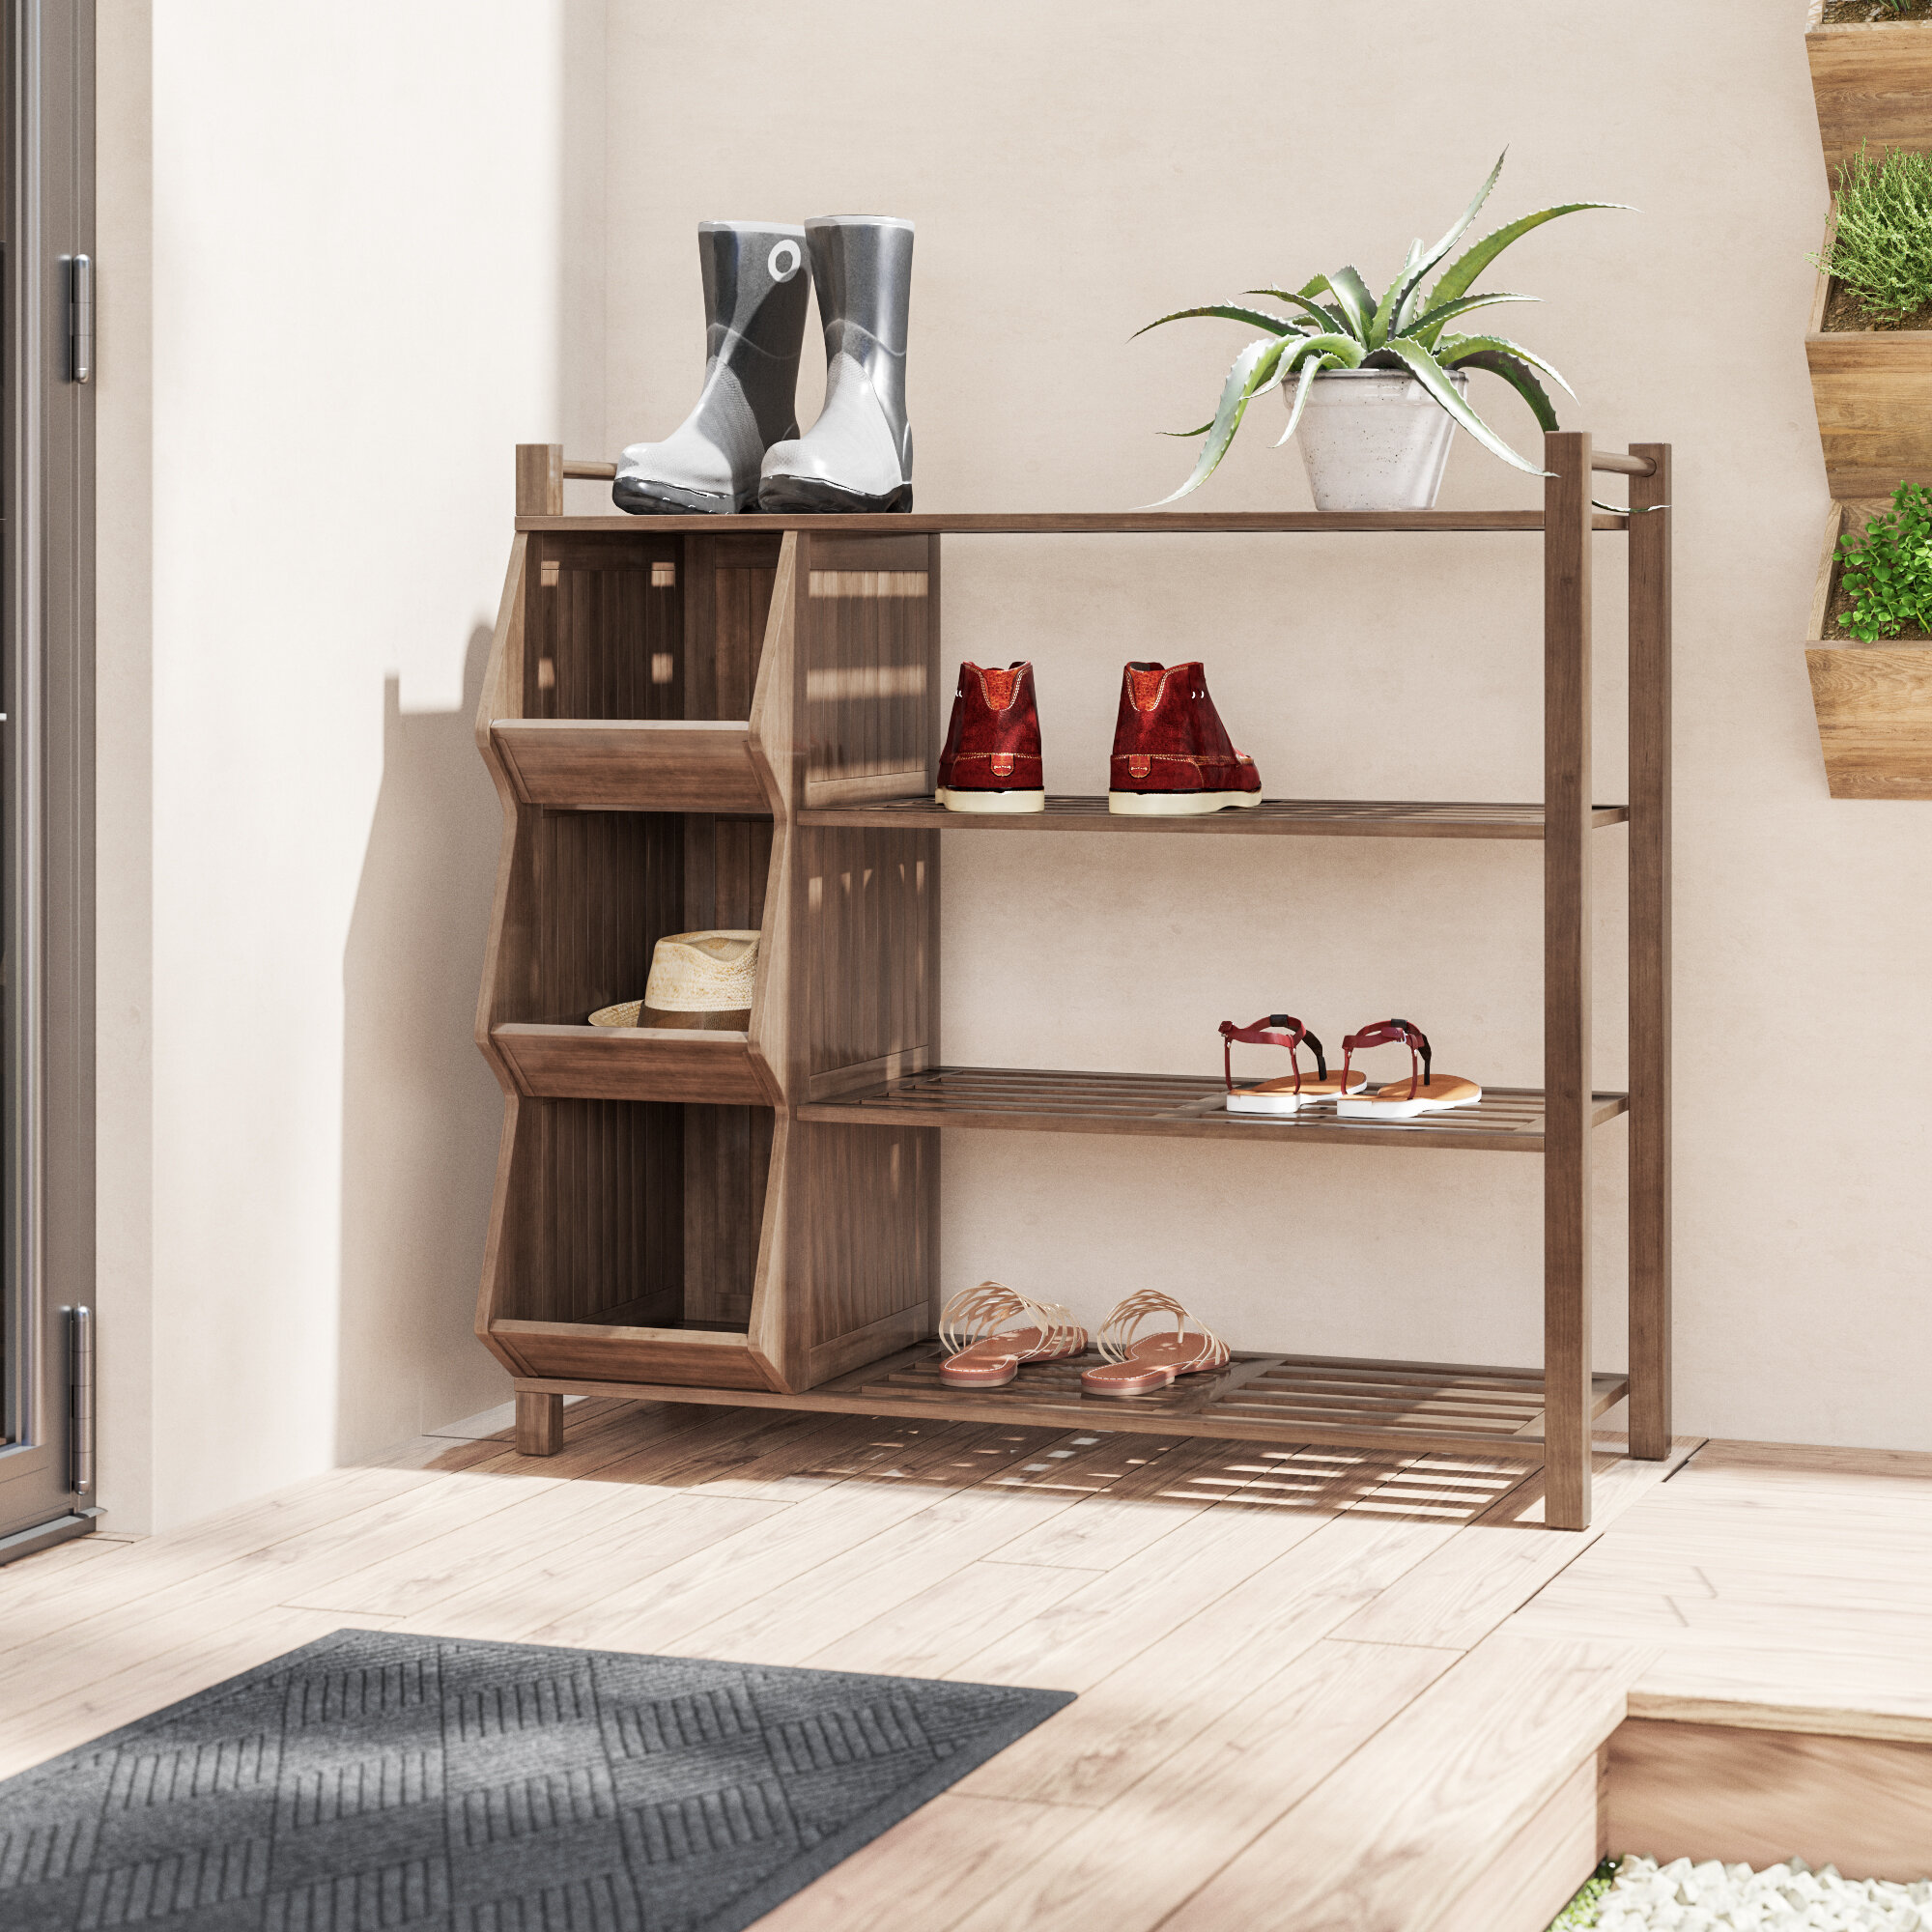 Wall mounted Solid Wood and Pipe shoe rack – Crafted of Light and